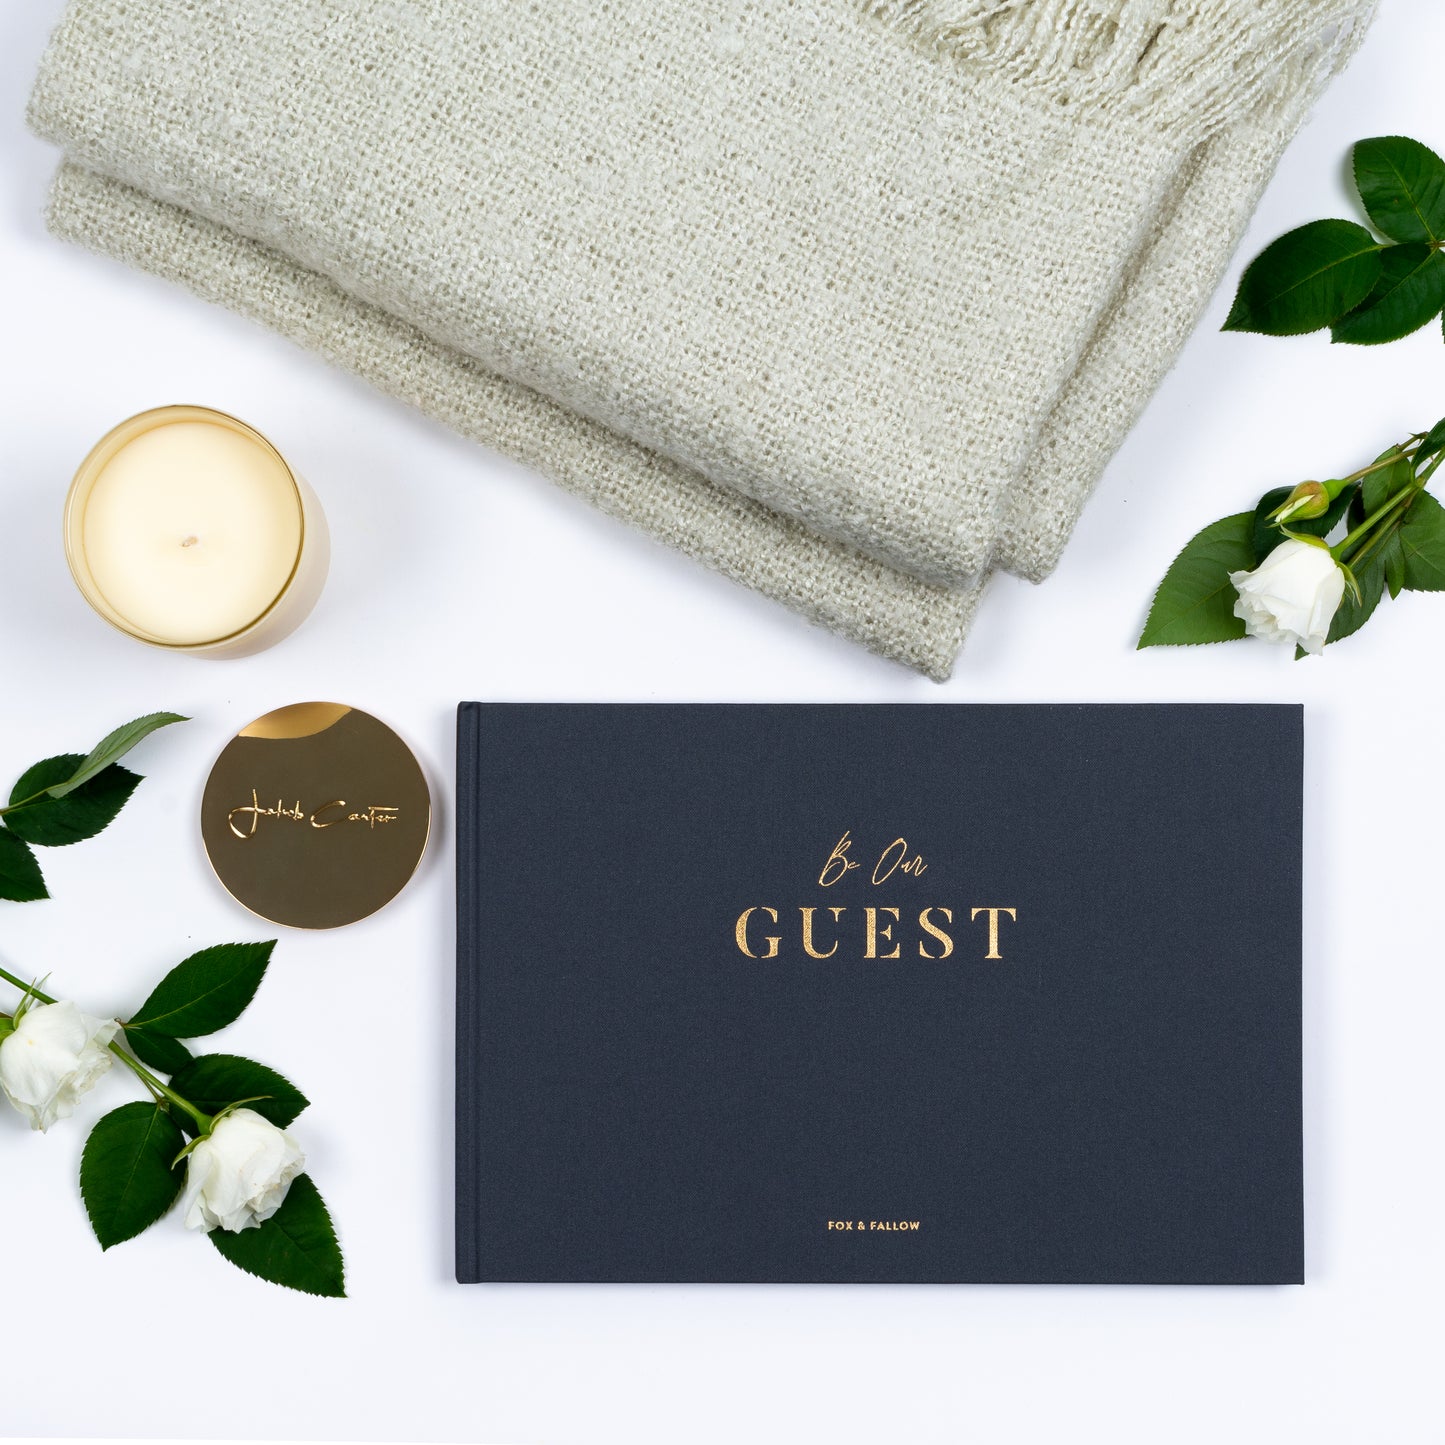 Out of Gift Box products are guest book, scented candle, soft throw.